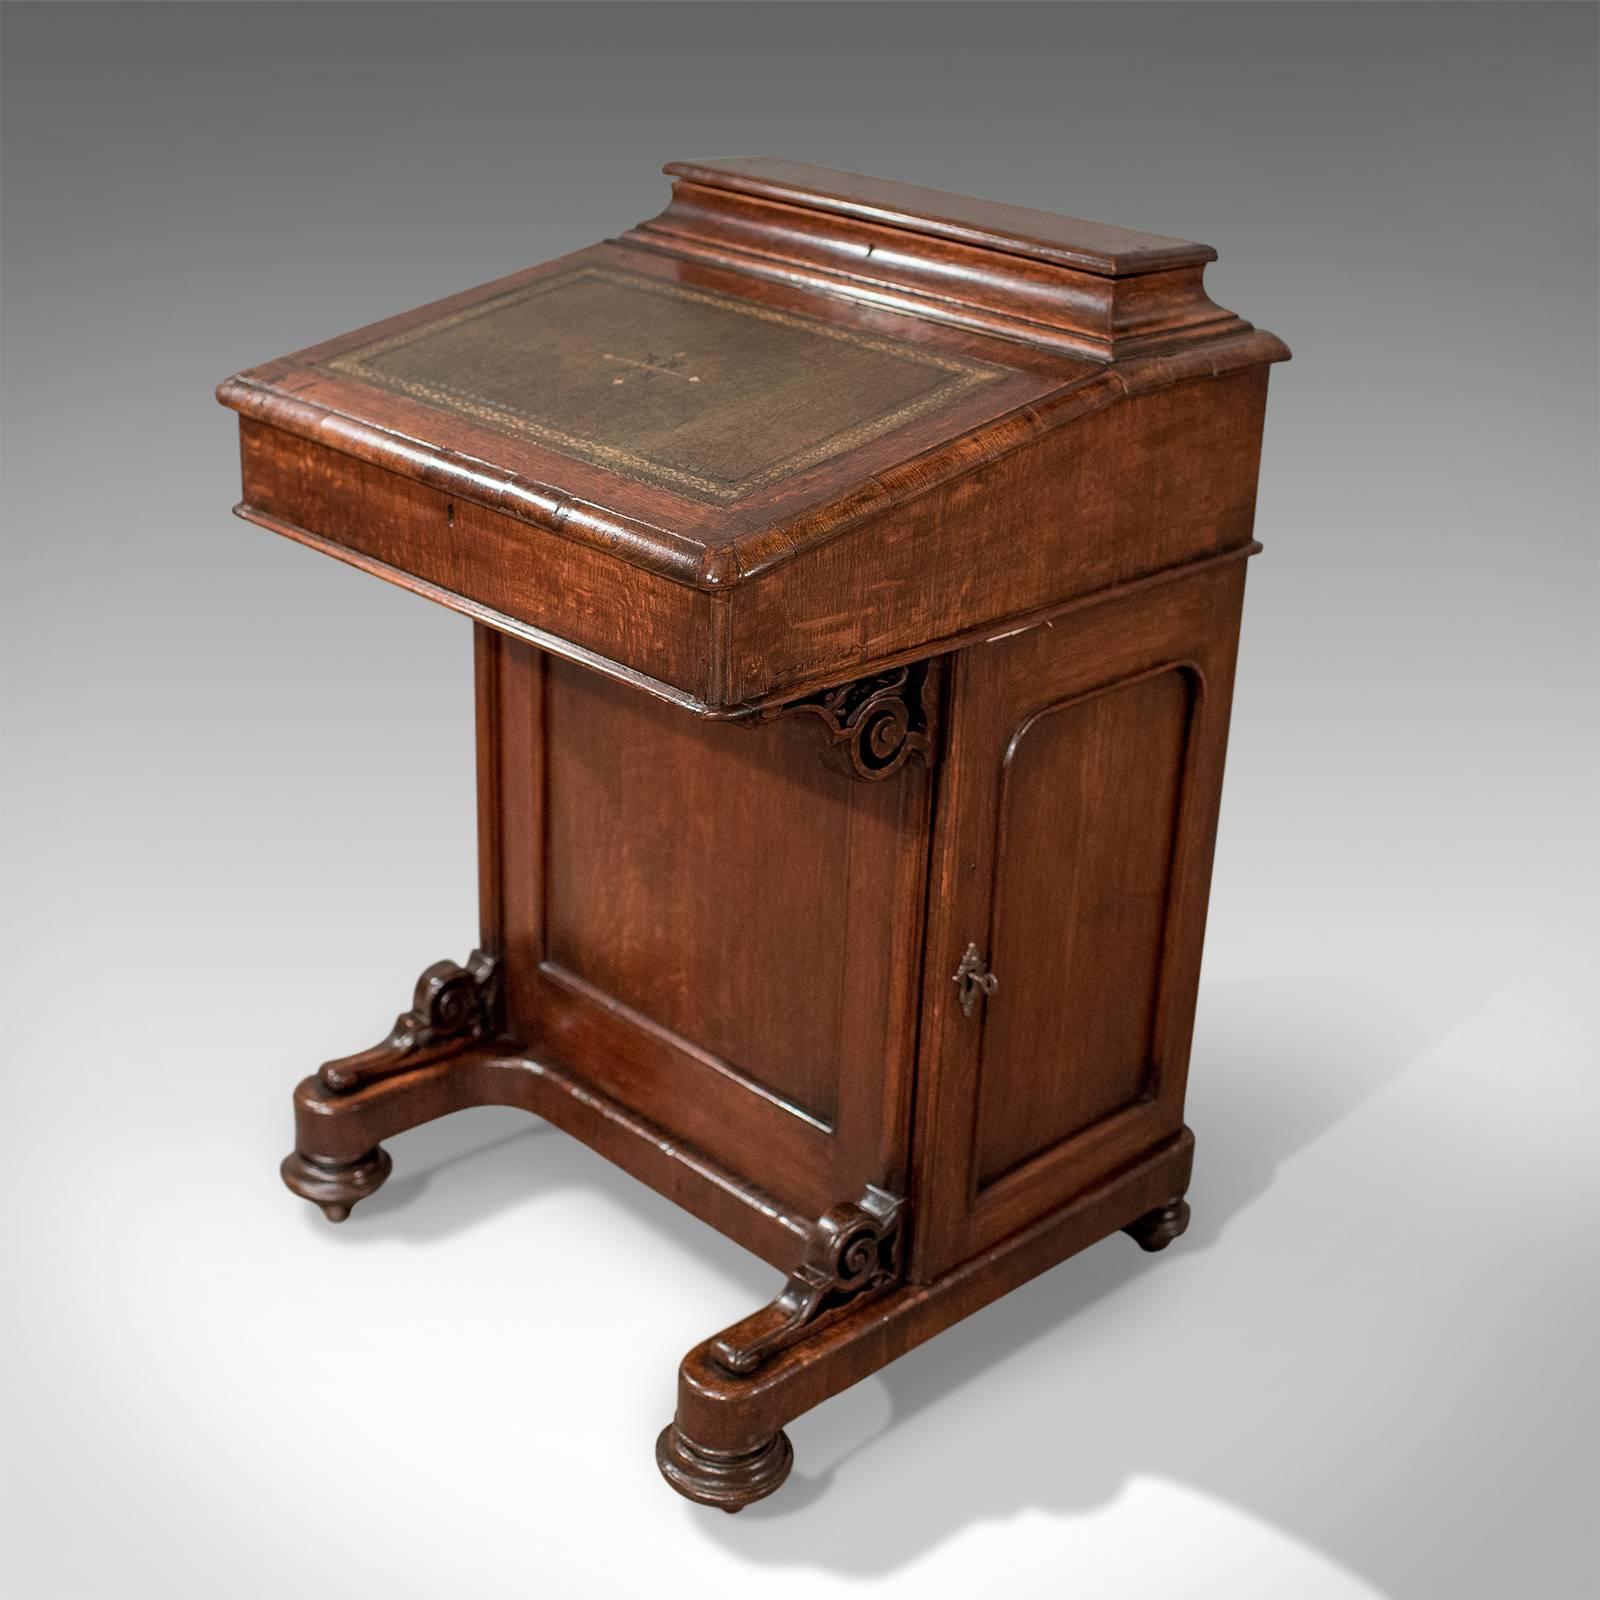 This is a Victorian antique Davenport in English oak. A small writing desk bureau, dating to circa 1870.

Attractive grain interest in the oak with medullary rays present
Deep patinated tones to polished wax finish
Contrasting inner with